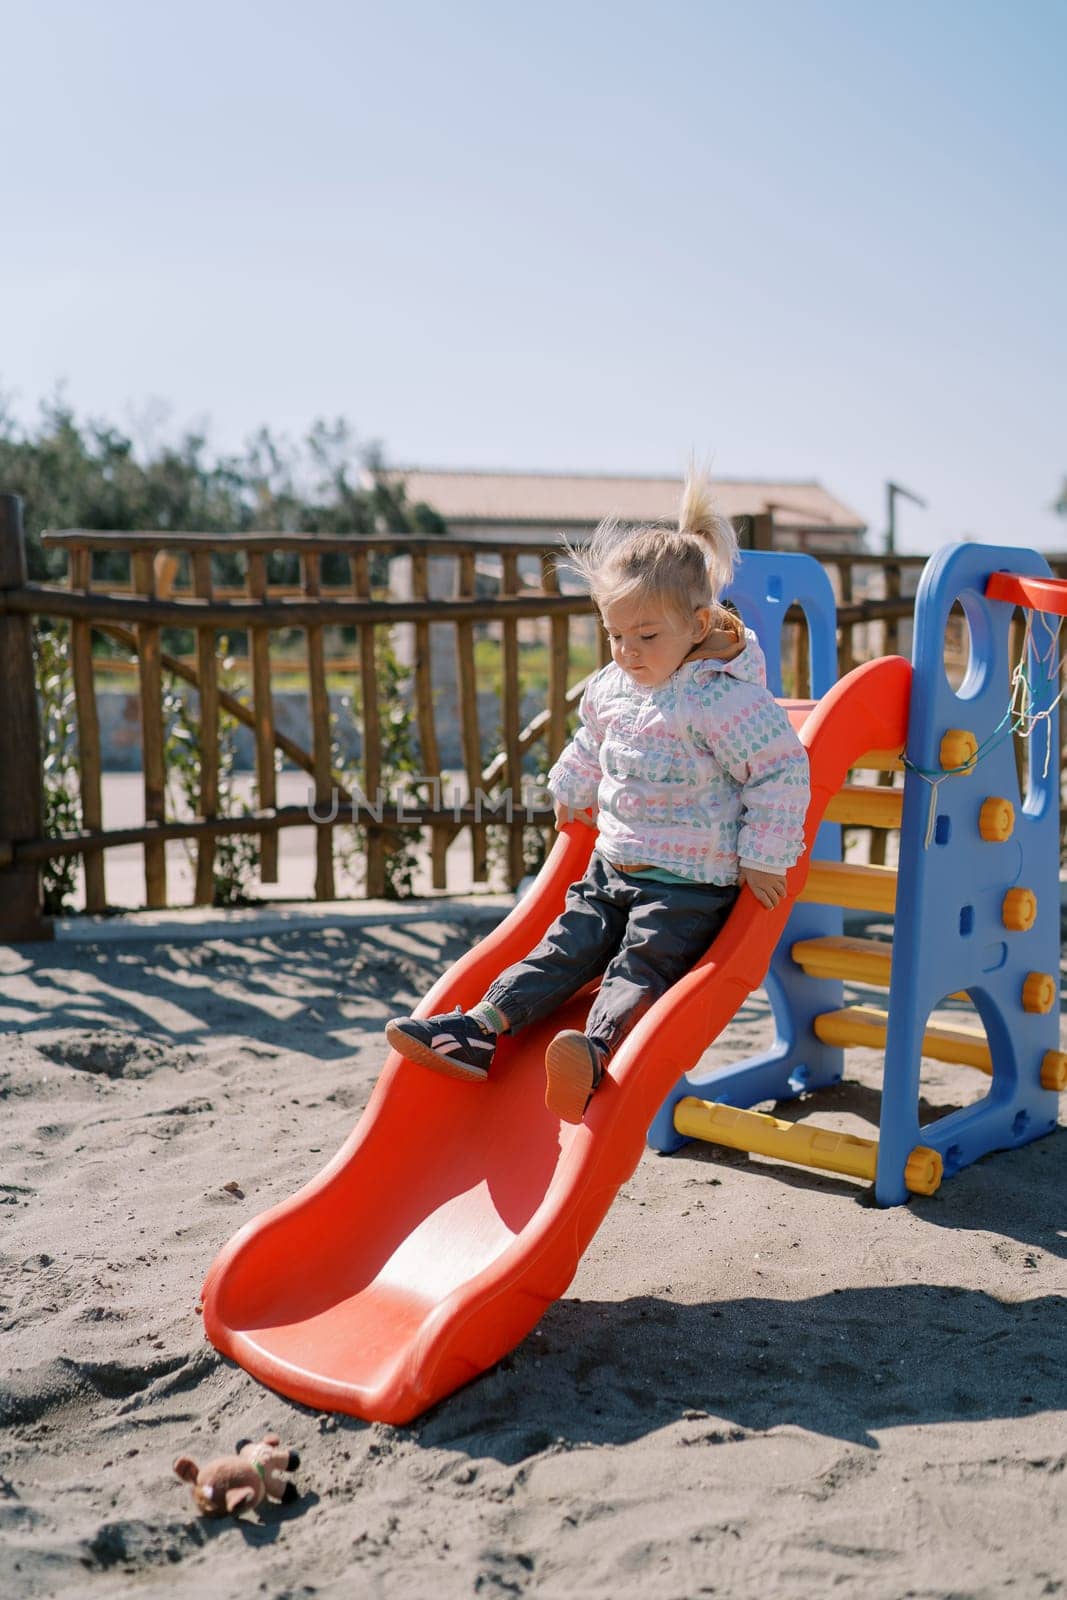 Little girl slides down a slide on the playground holding onto the handrails. High quality photo